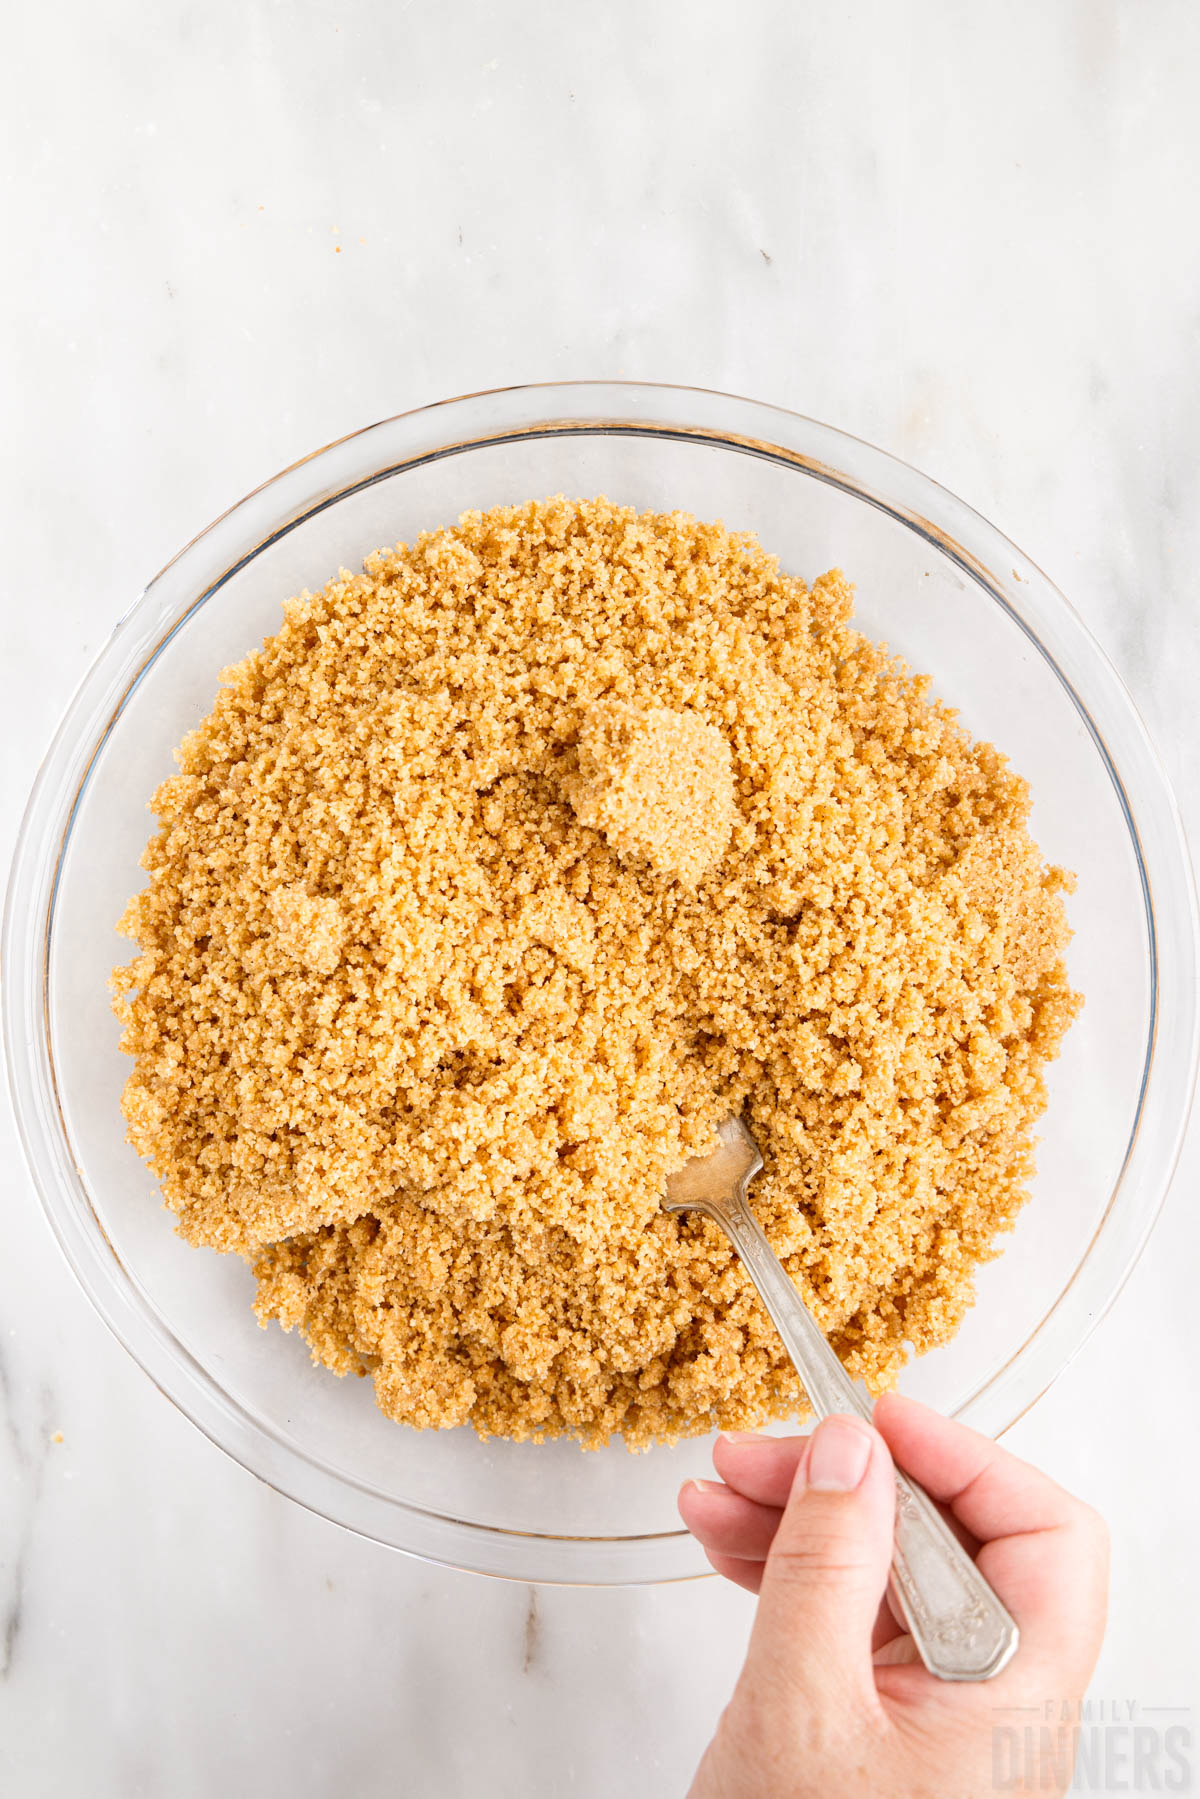 graham cracker crumbs in a glass bowl